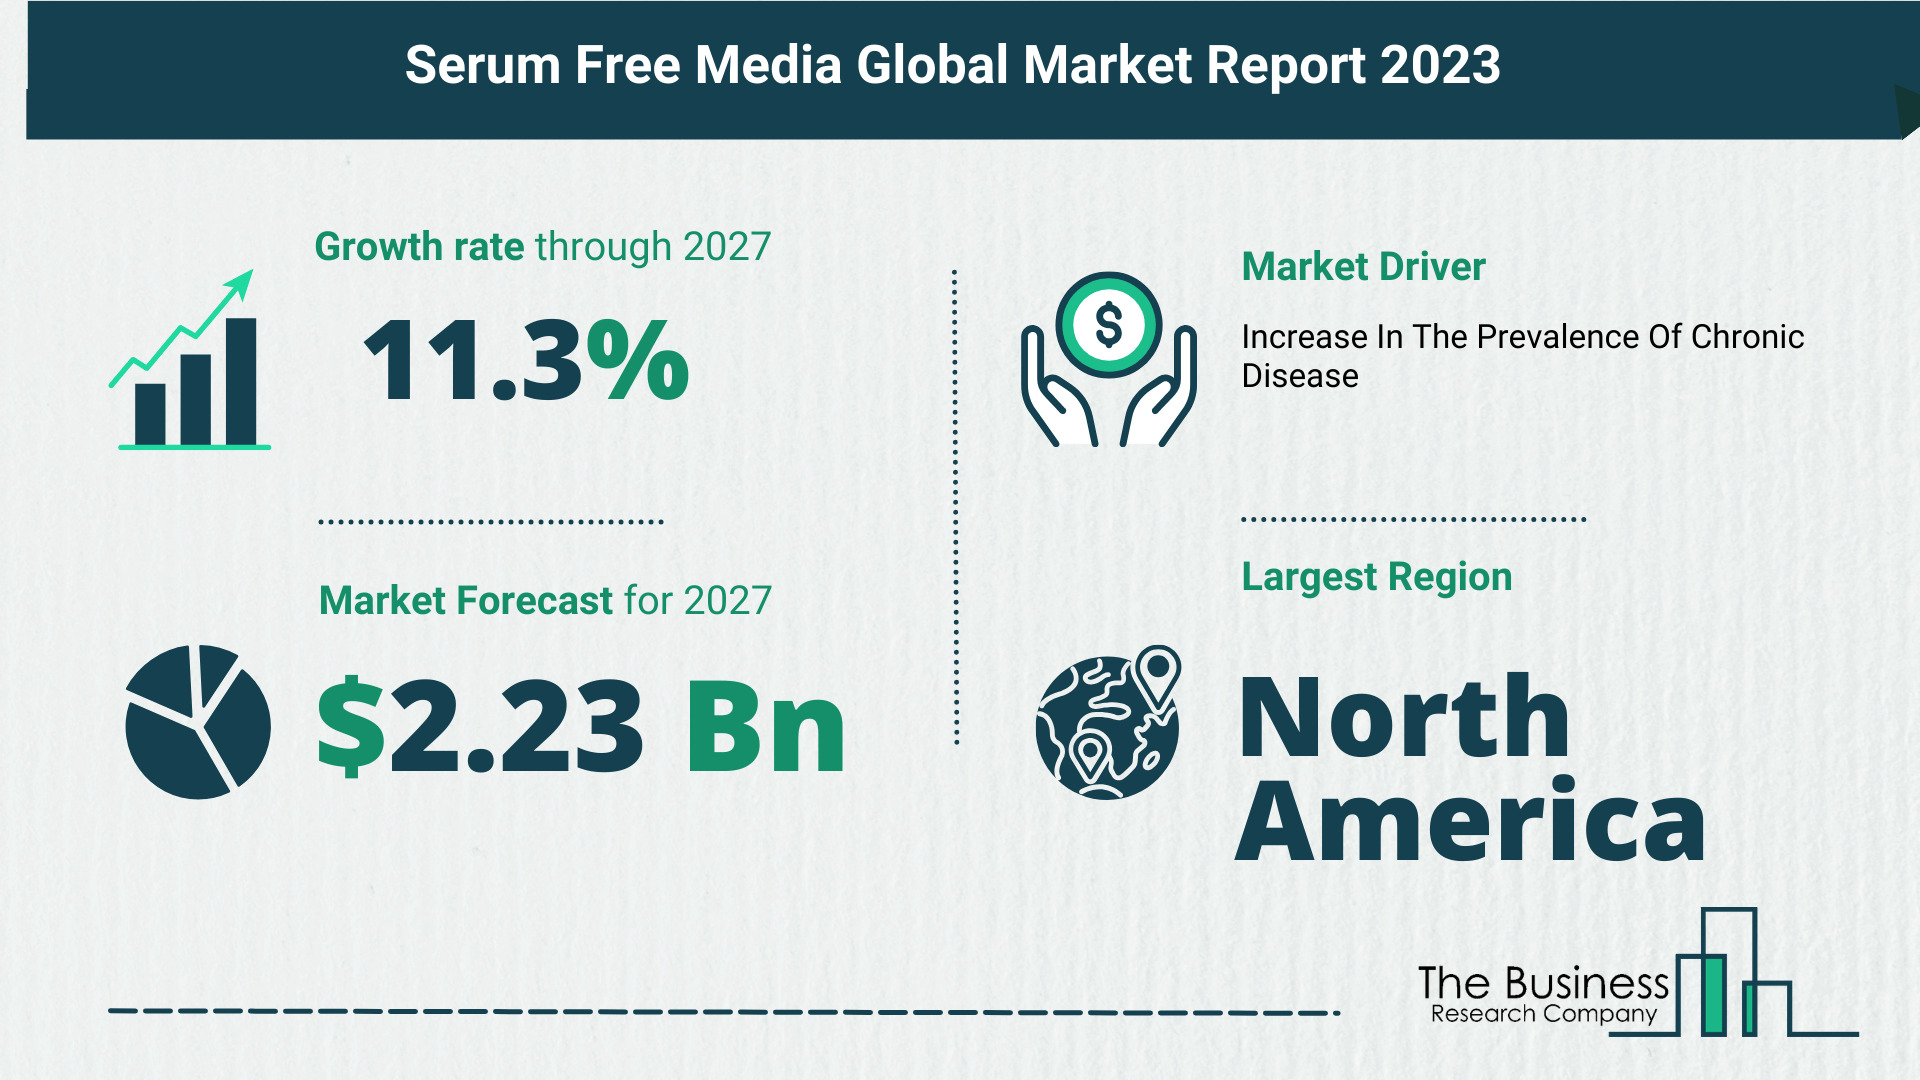 Top 5 Insights From The Serum Free Media Market Report 2023